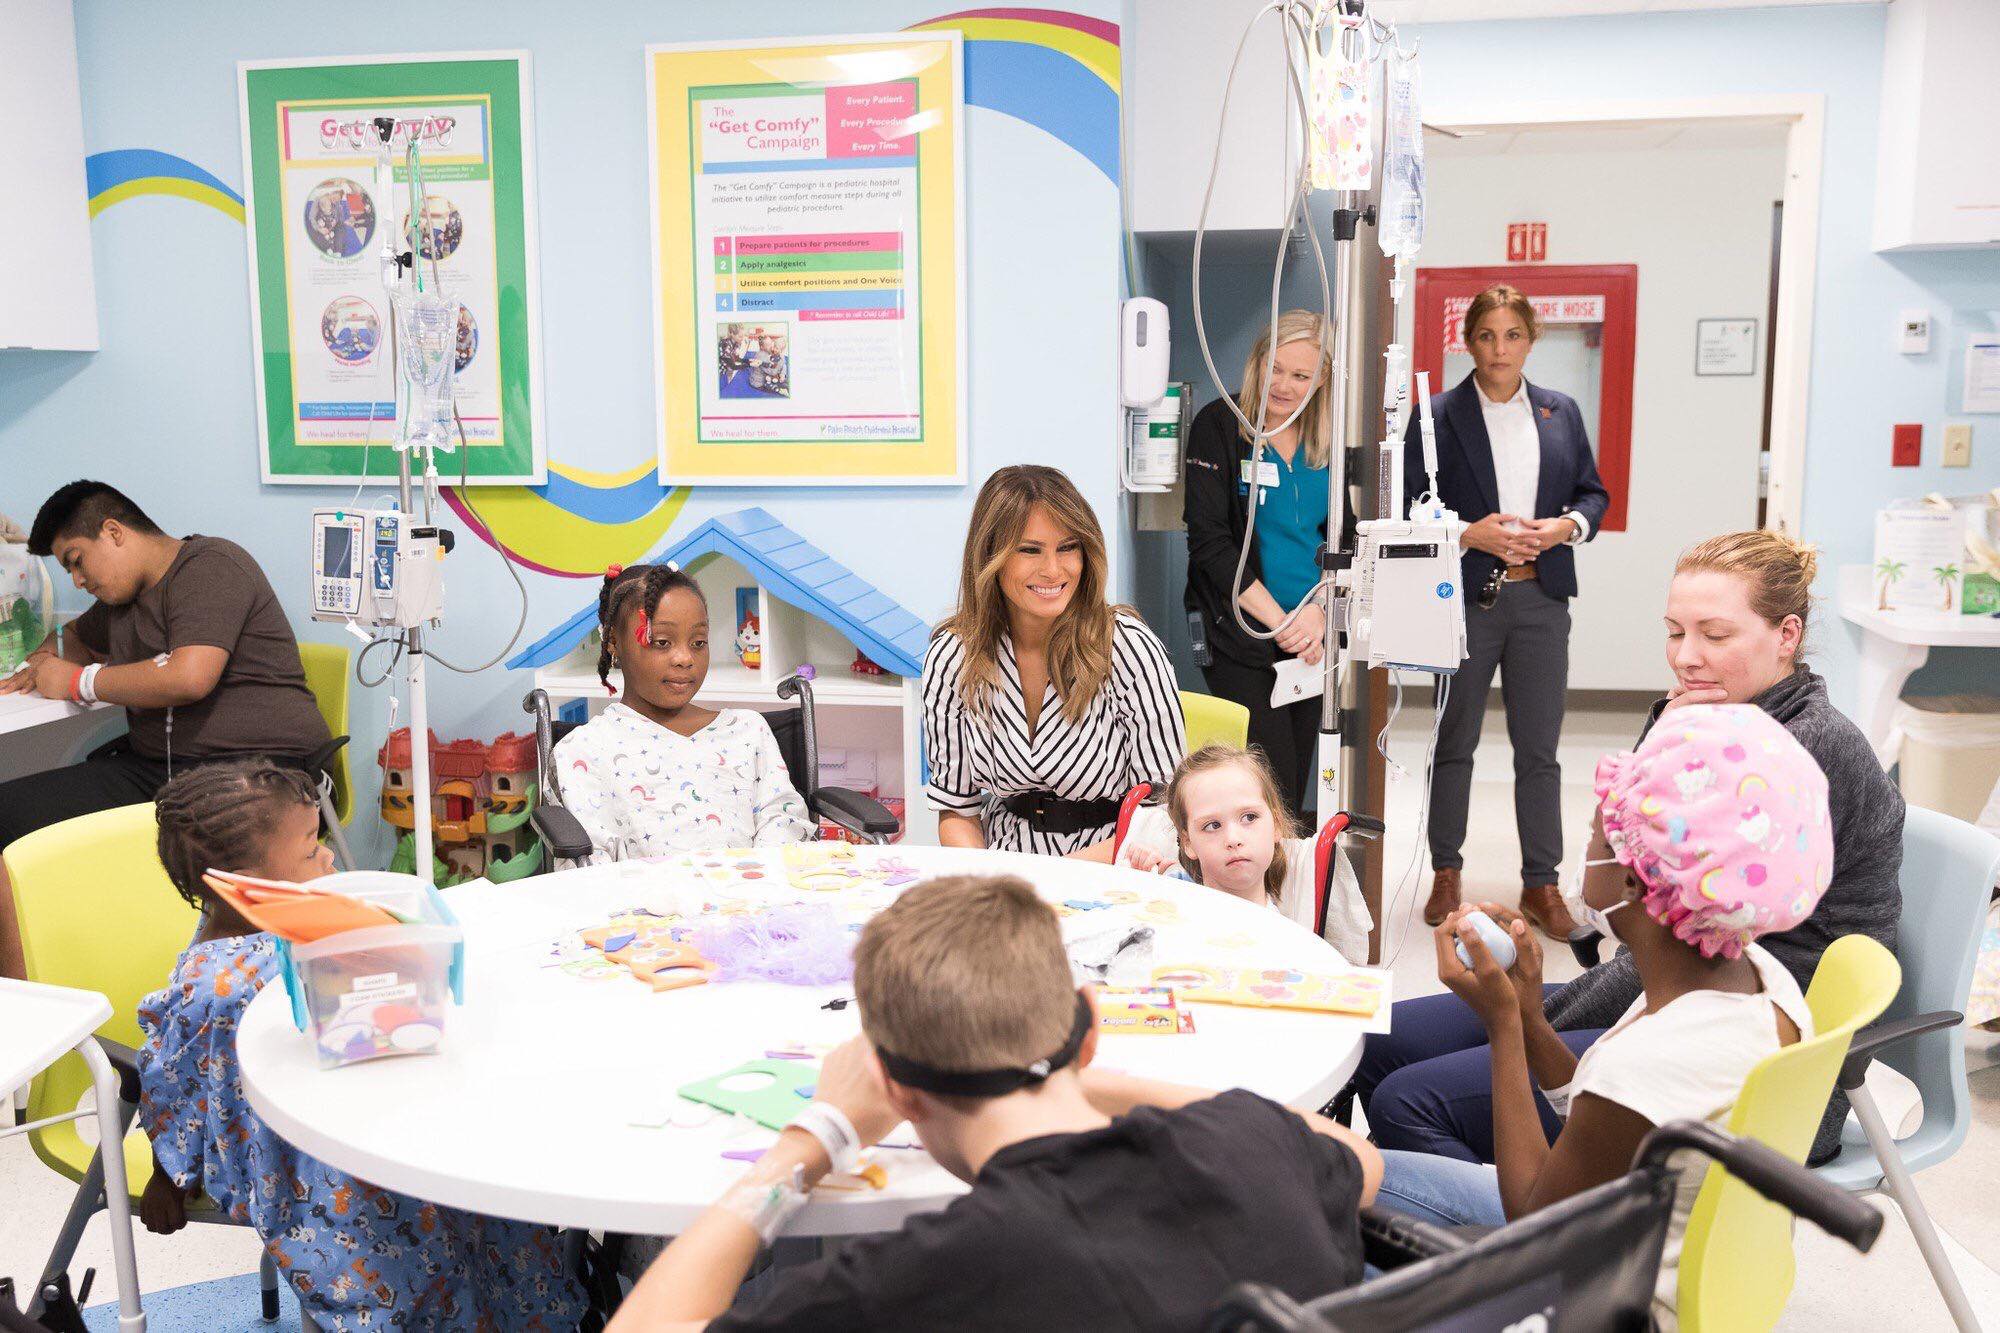 FLOTUS on Twitter said, "Enjoyed my visit to @StMarysMC today. So great to spend time with some of their brave patients and hard working doctors and nurses." Photo credit to White House. 